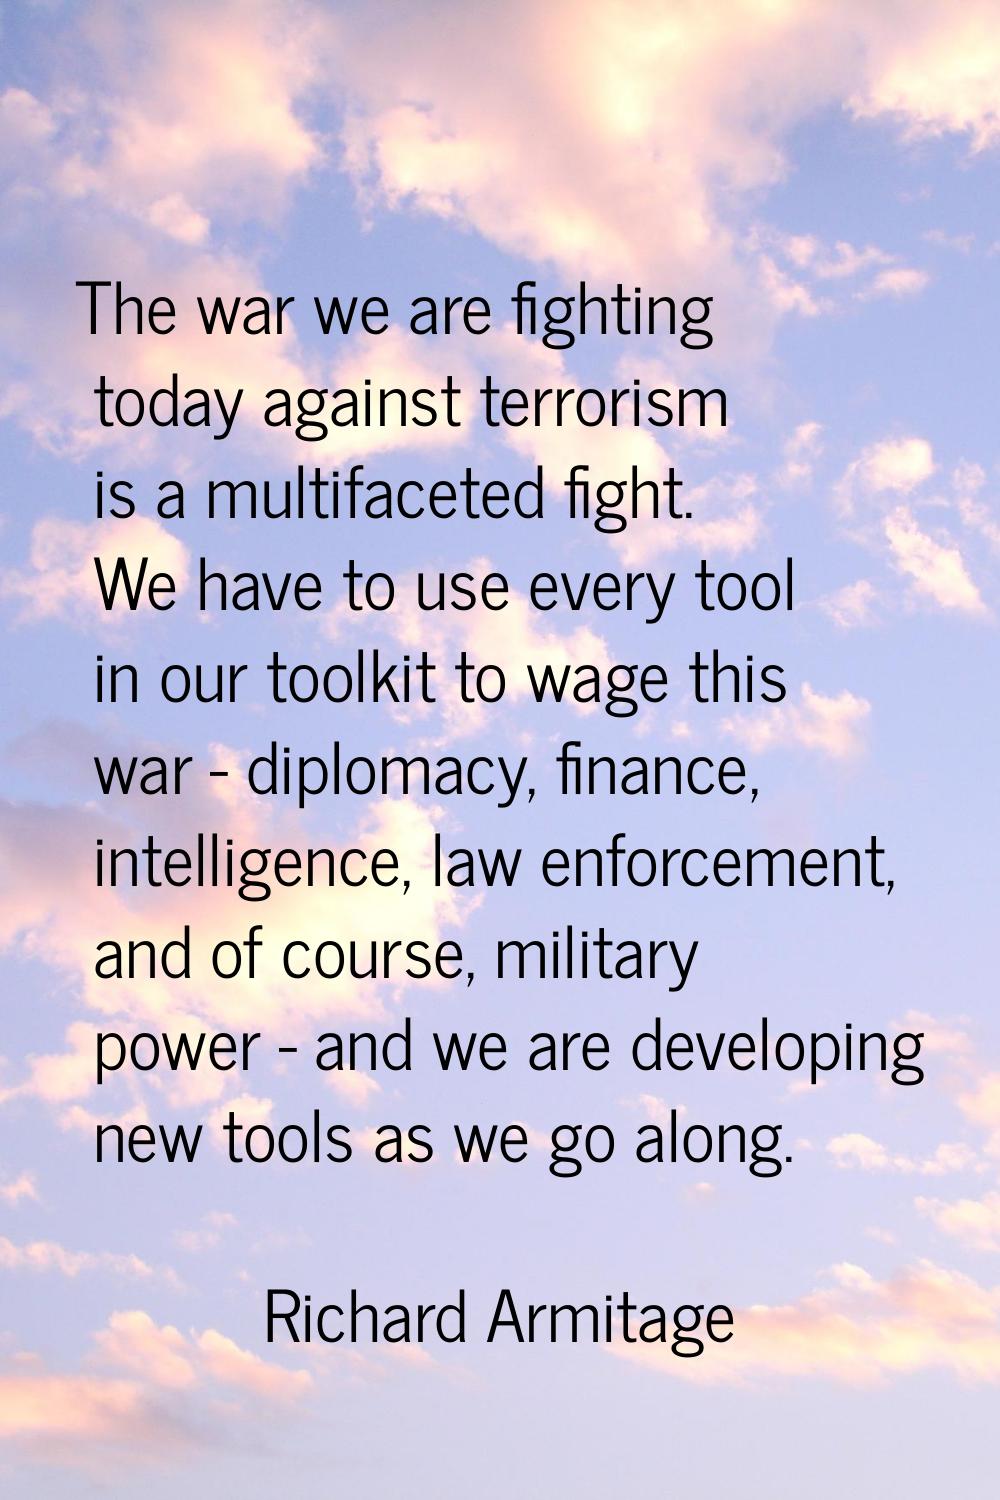 The war we are fighting today against terrorism is a multifaceted fight. We have to use every tool 